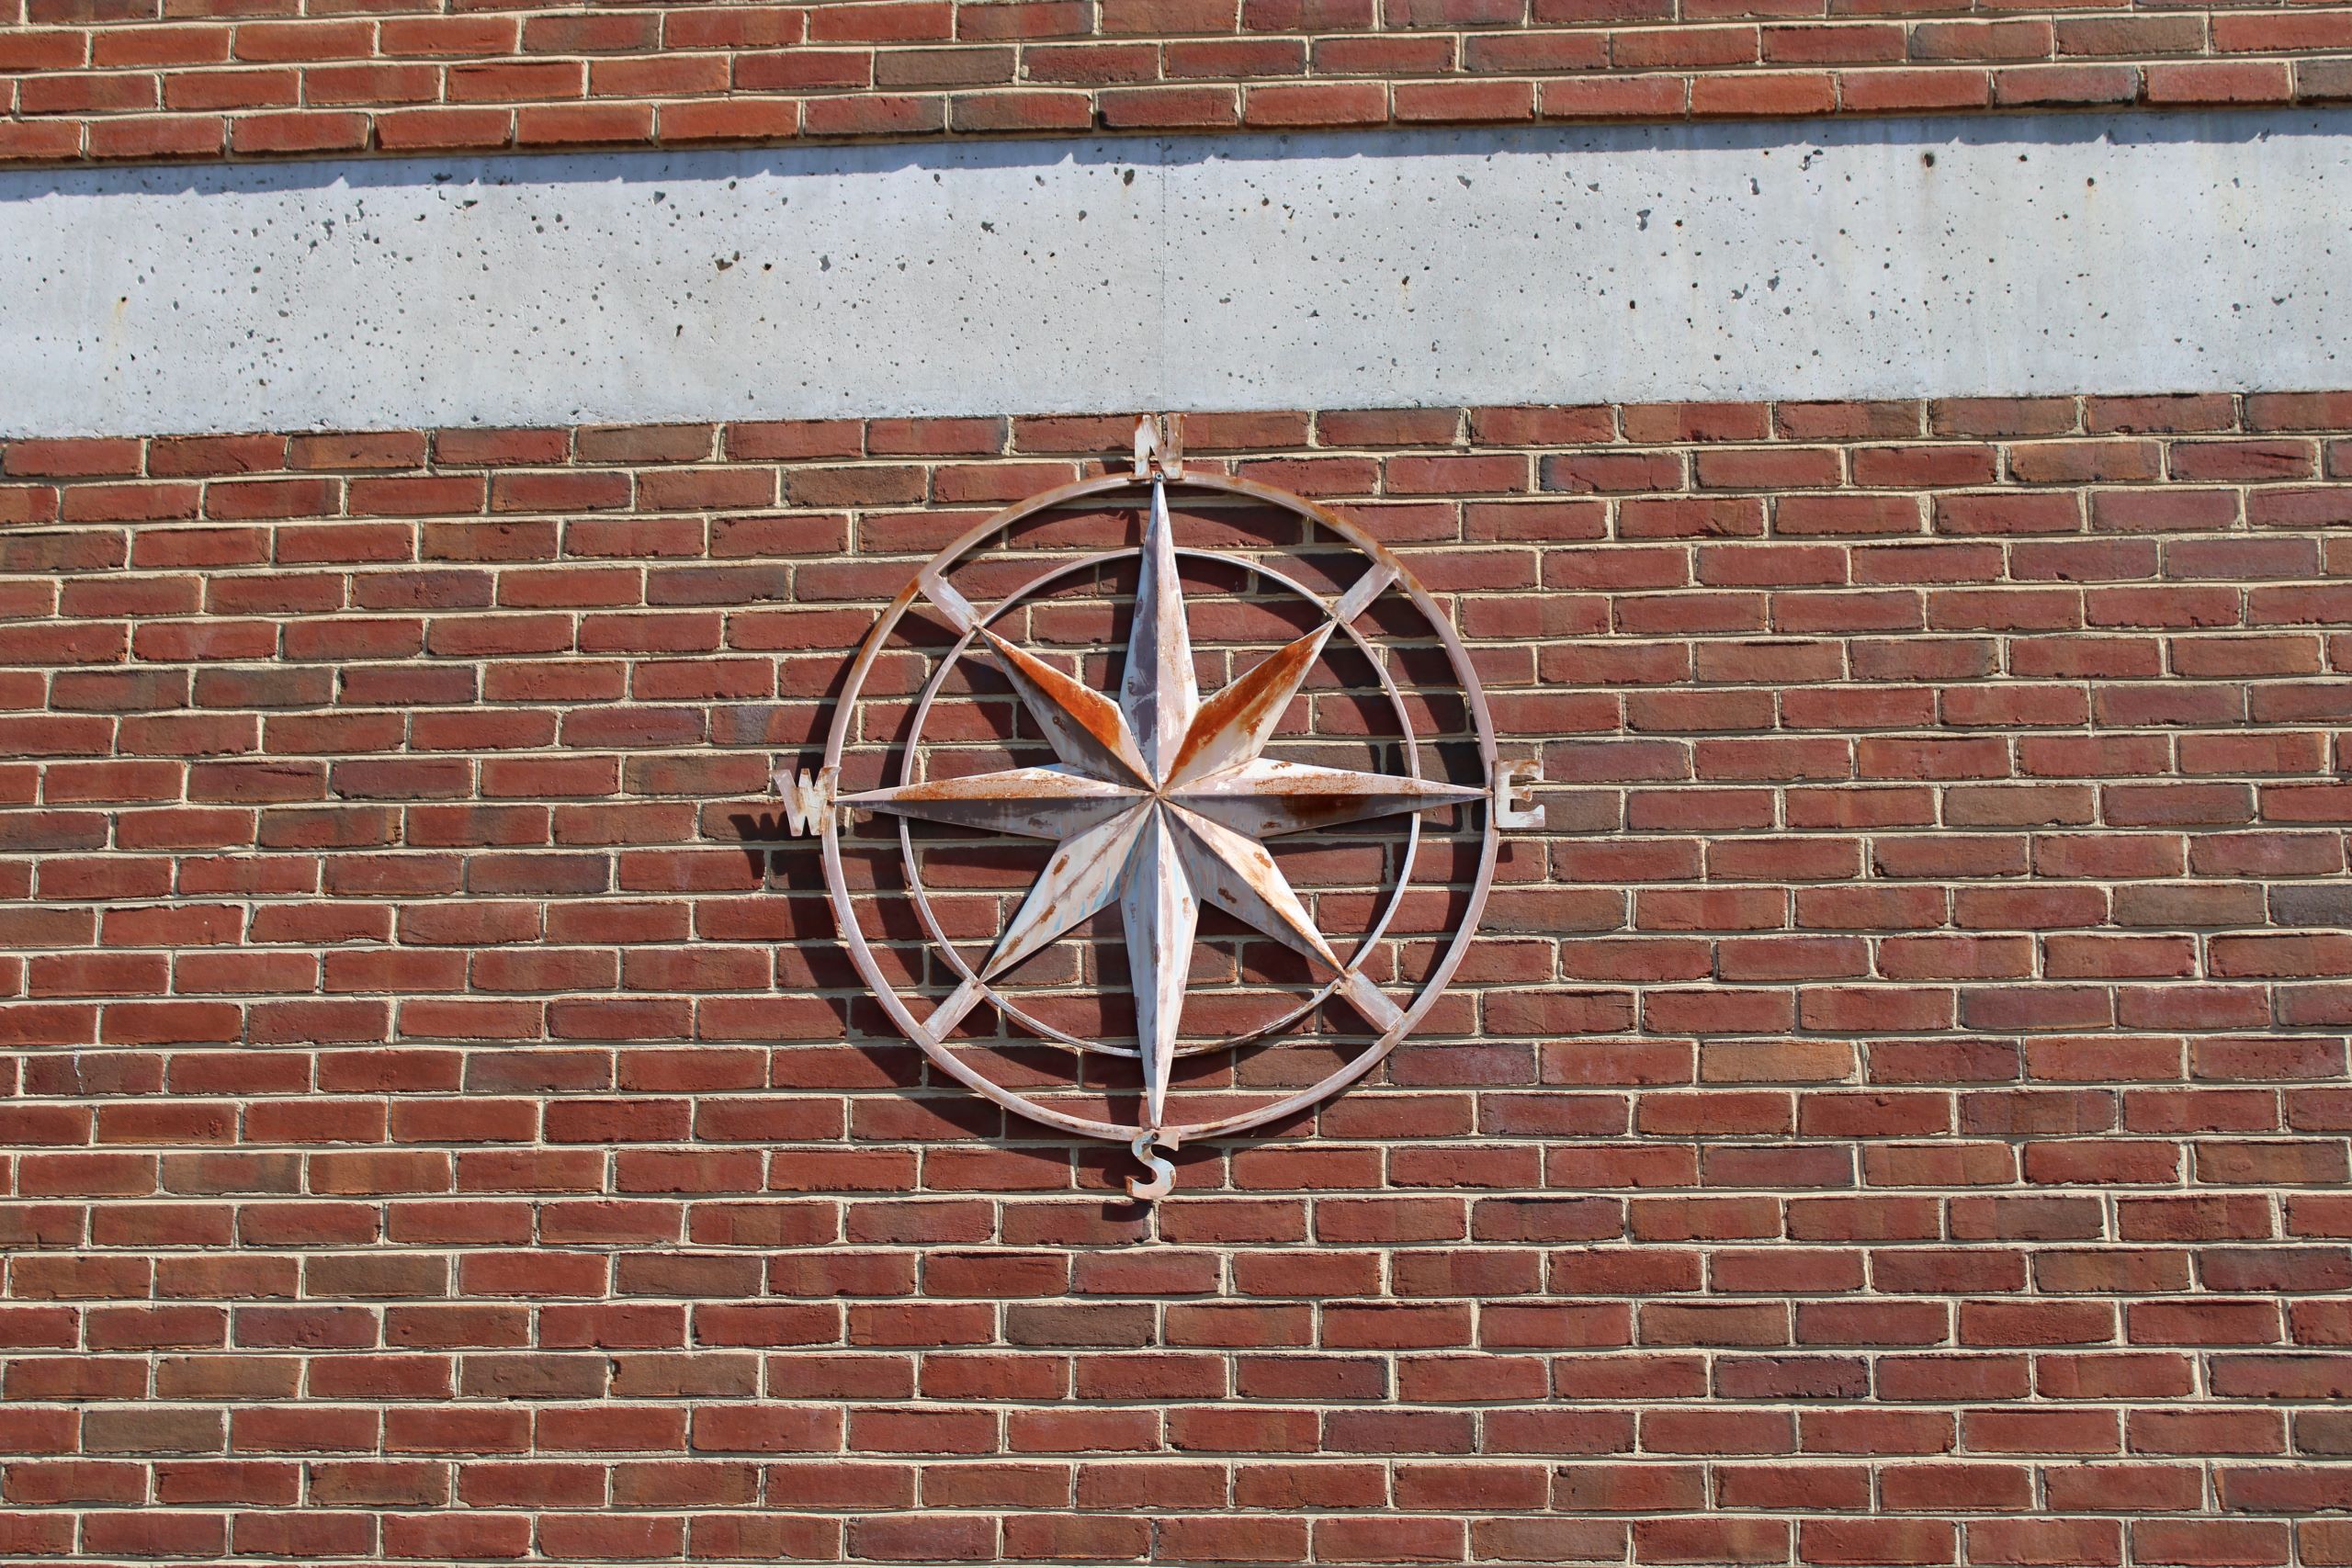 Compass art hanging outside